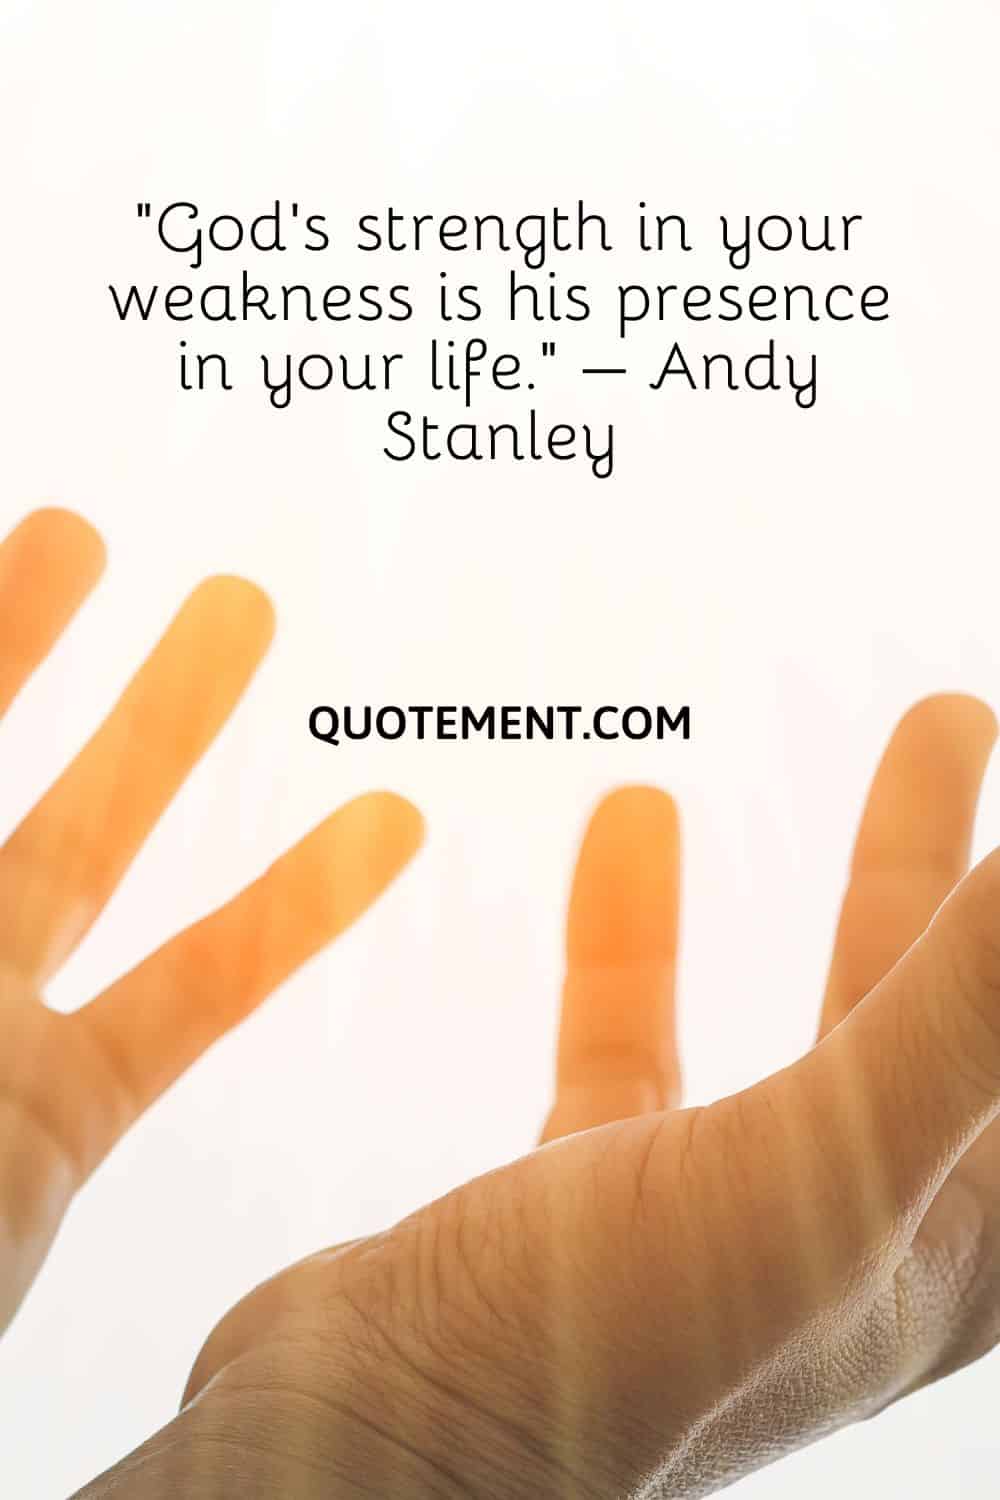 “God’s strength in your weakness is his presence in your life.” – Andy Stanley